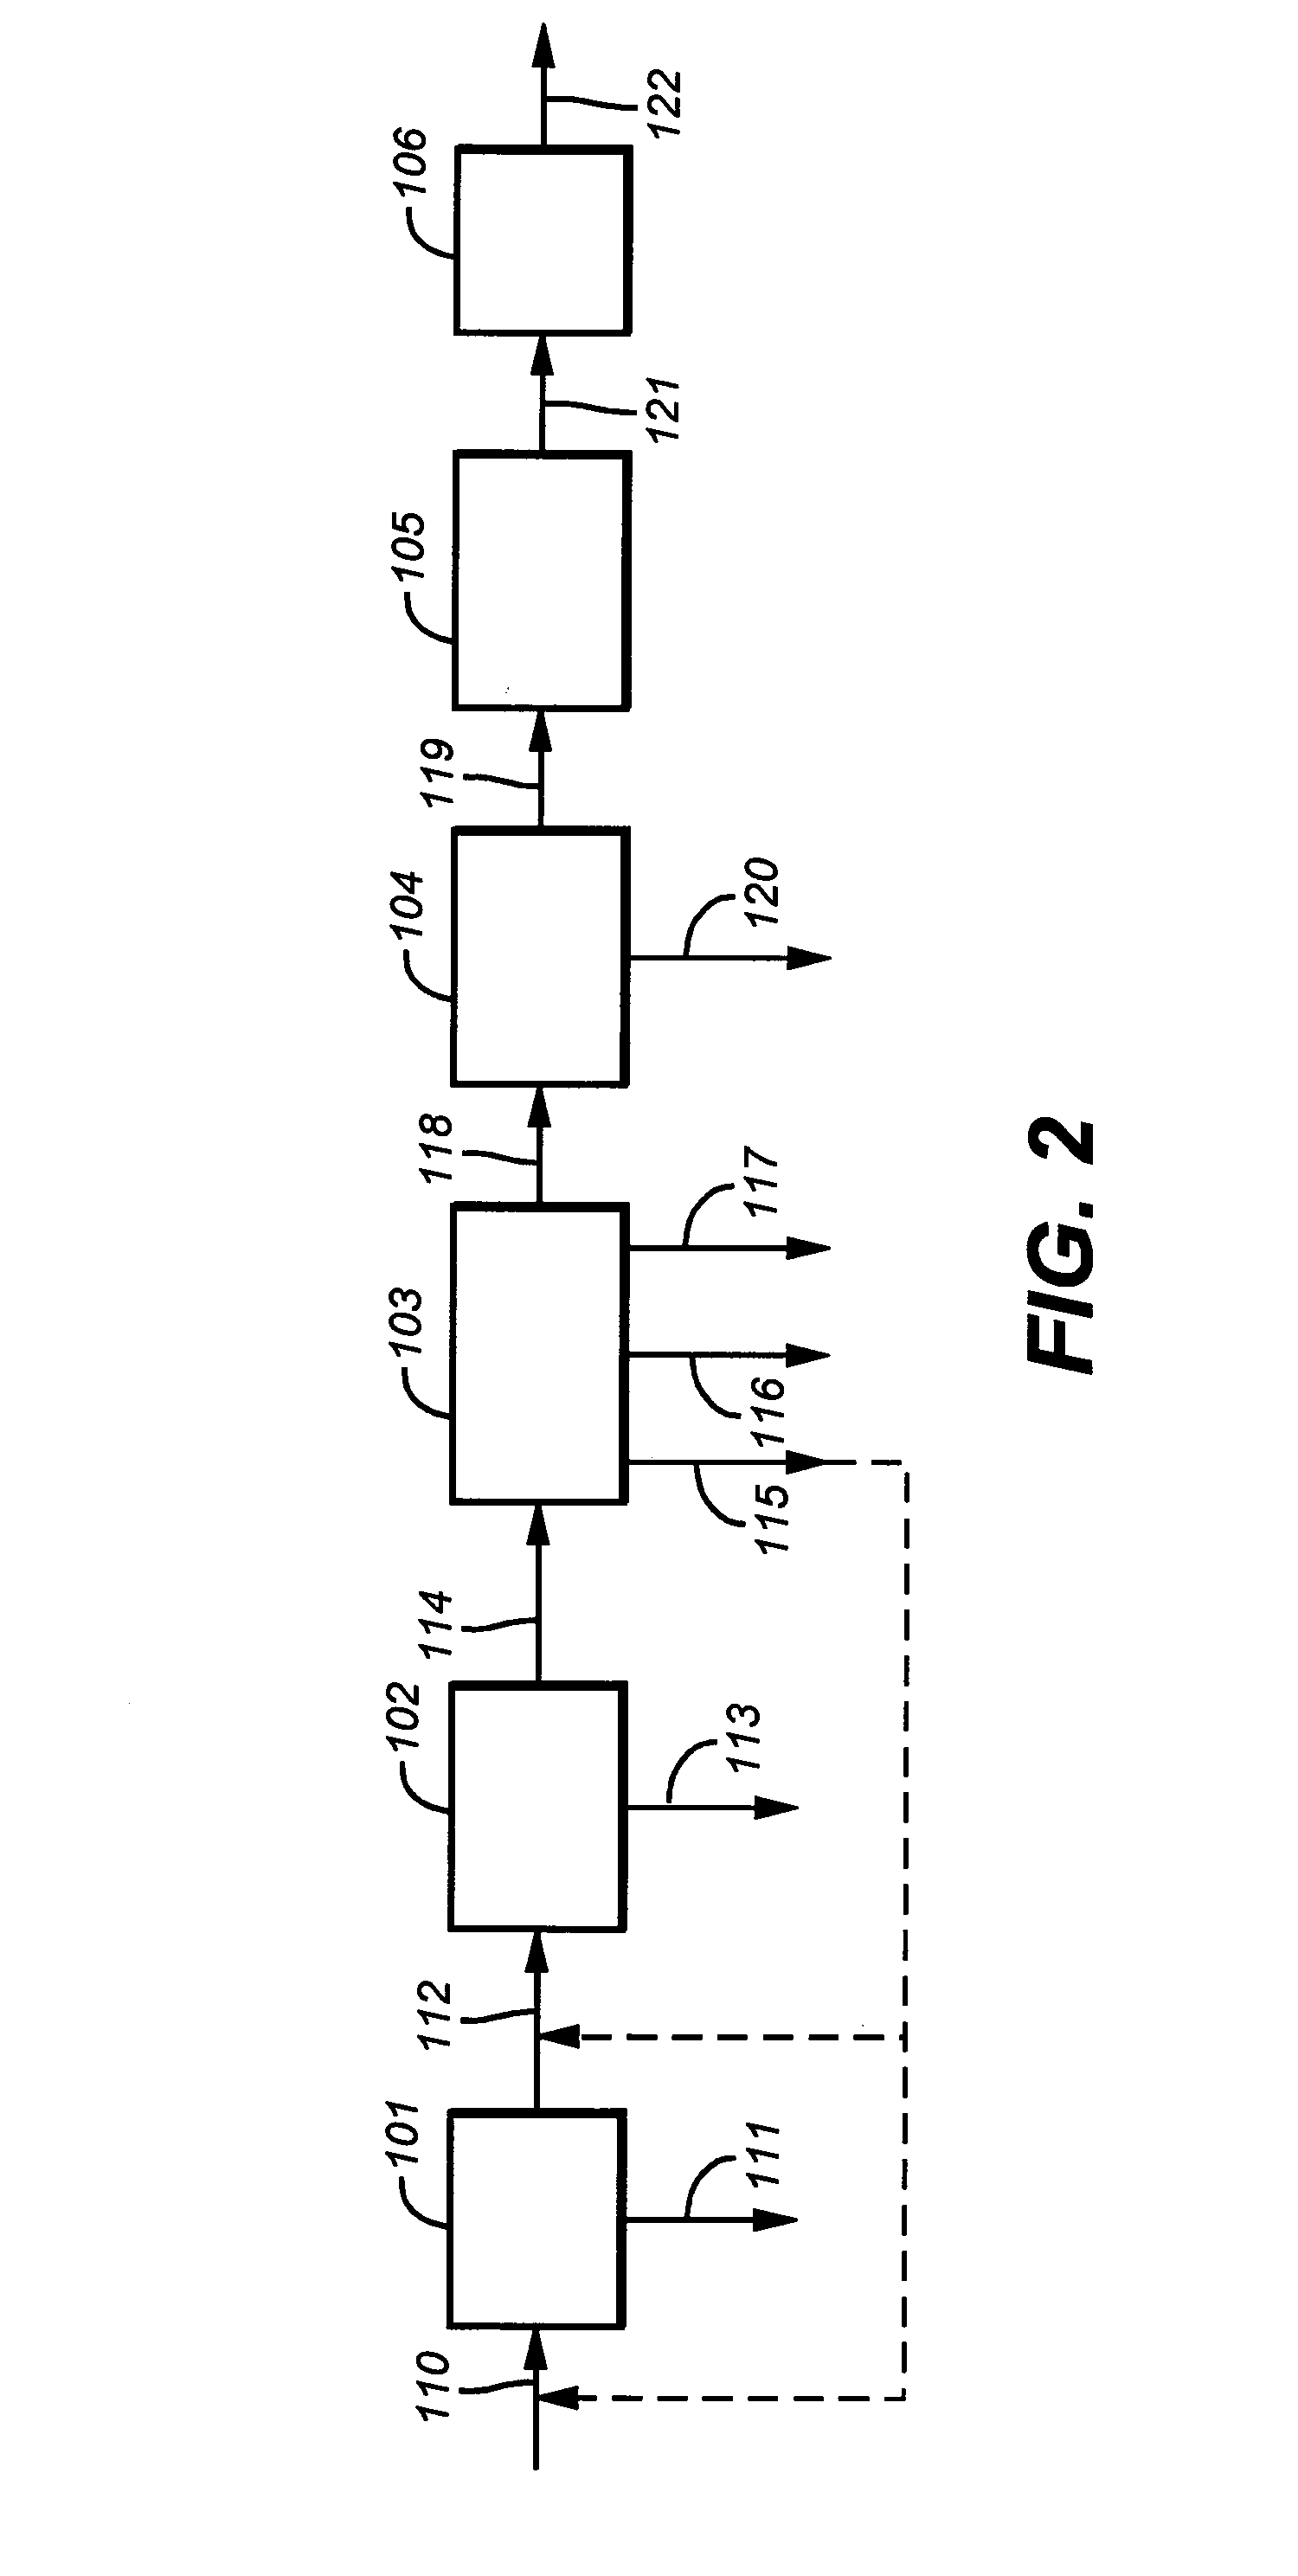 Process and apparatus for the separation of a gaseous mixture